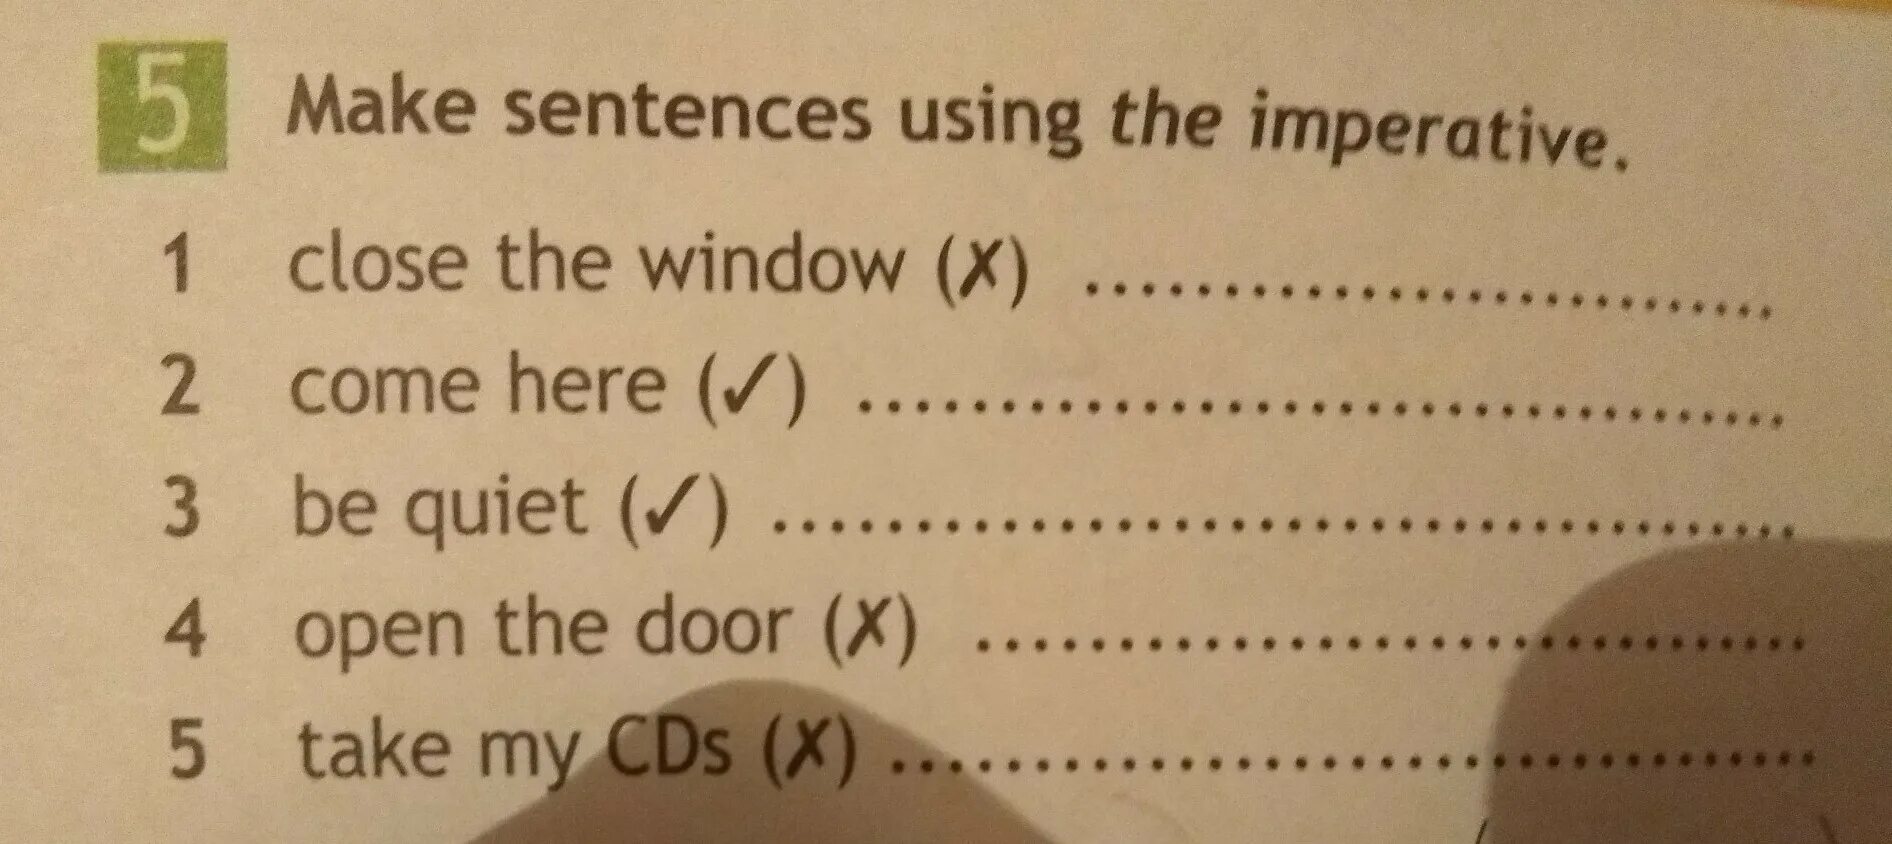 Make sentences using the imperative 5 класс. Гдз make sentences. Make sentences 2 класс. Make sentences using the imperative 5 класс close the Window. Make sentences with well